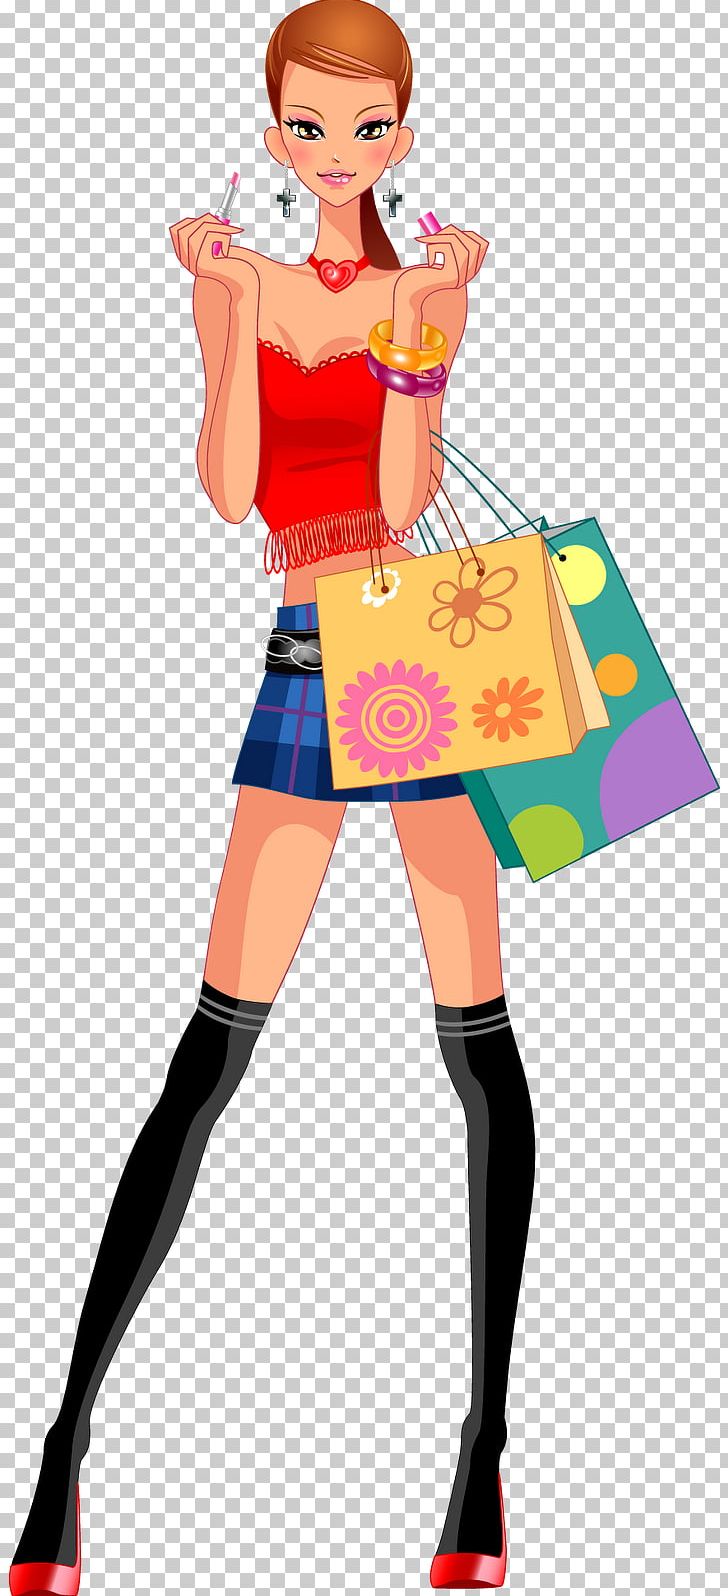 Shopping Woman PNG, Clipart, Art, Clip Art, Clothing, Costume, Digital Image Free PNG Download